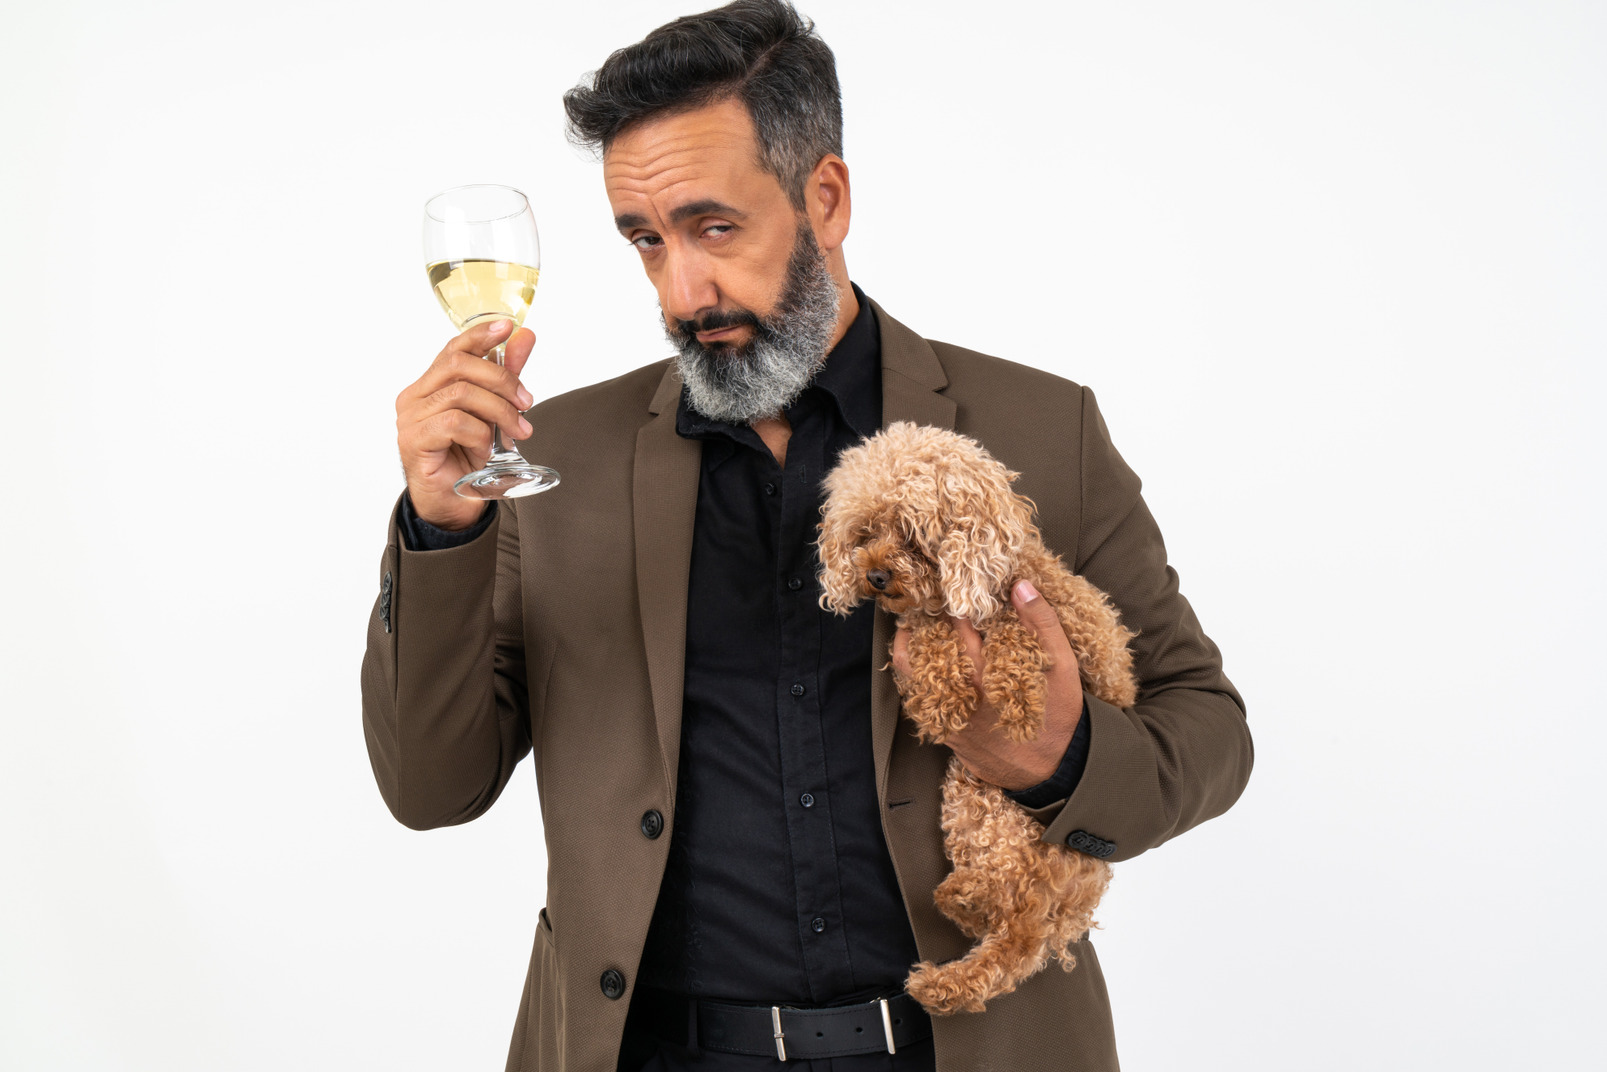 Handsome man with a puppy holding a glass of wine